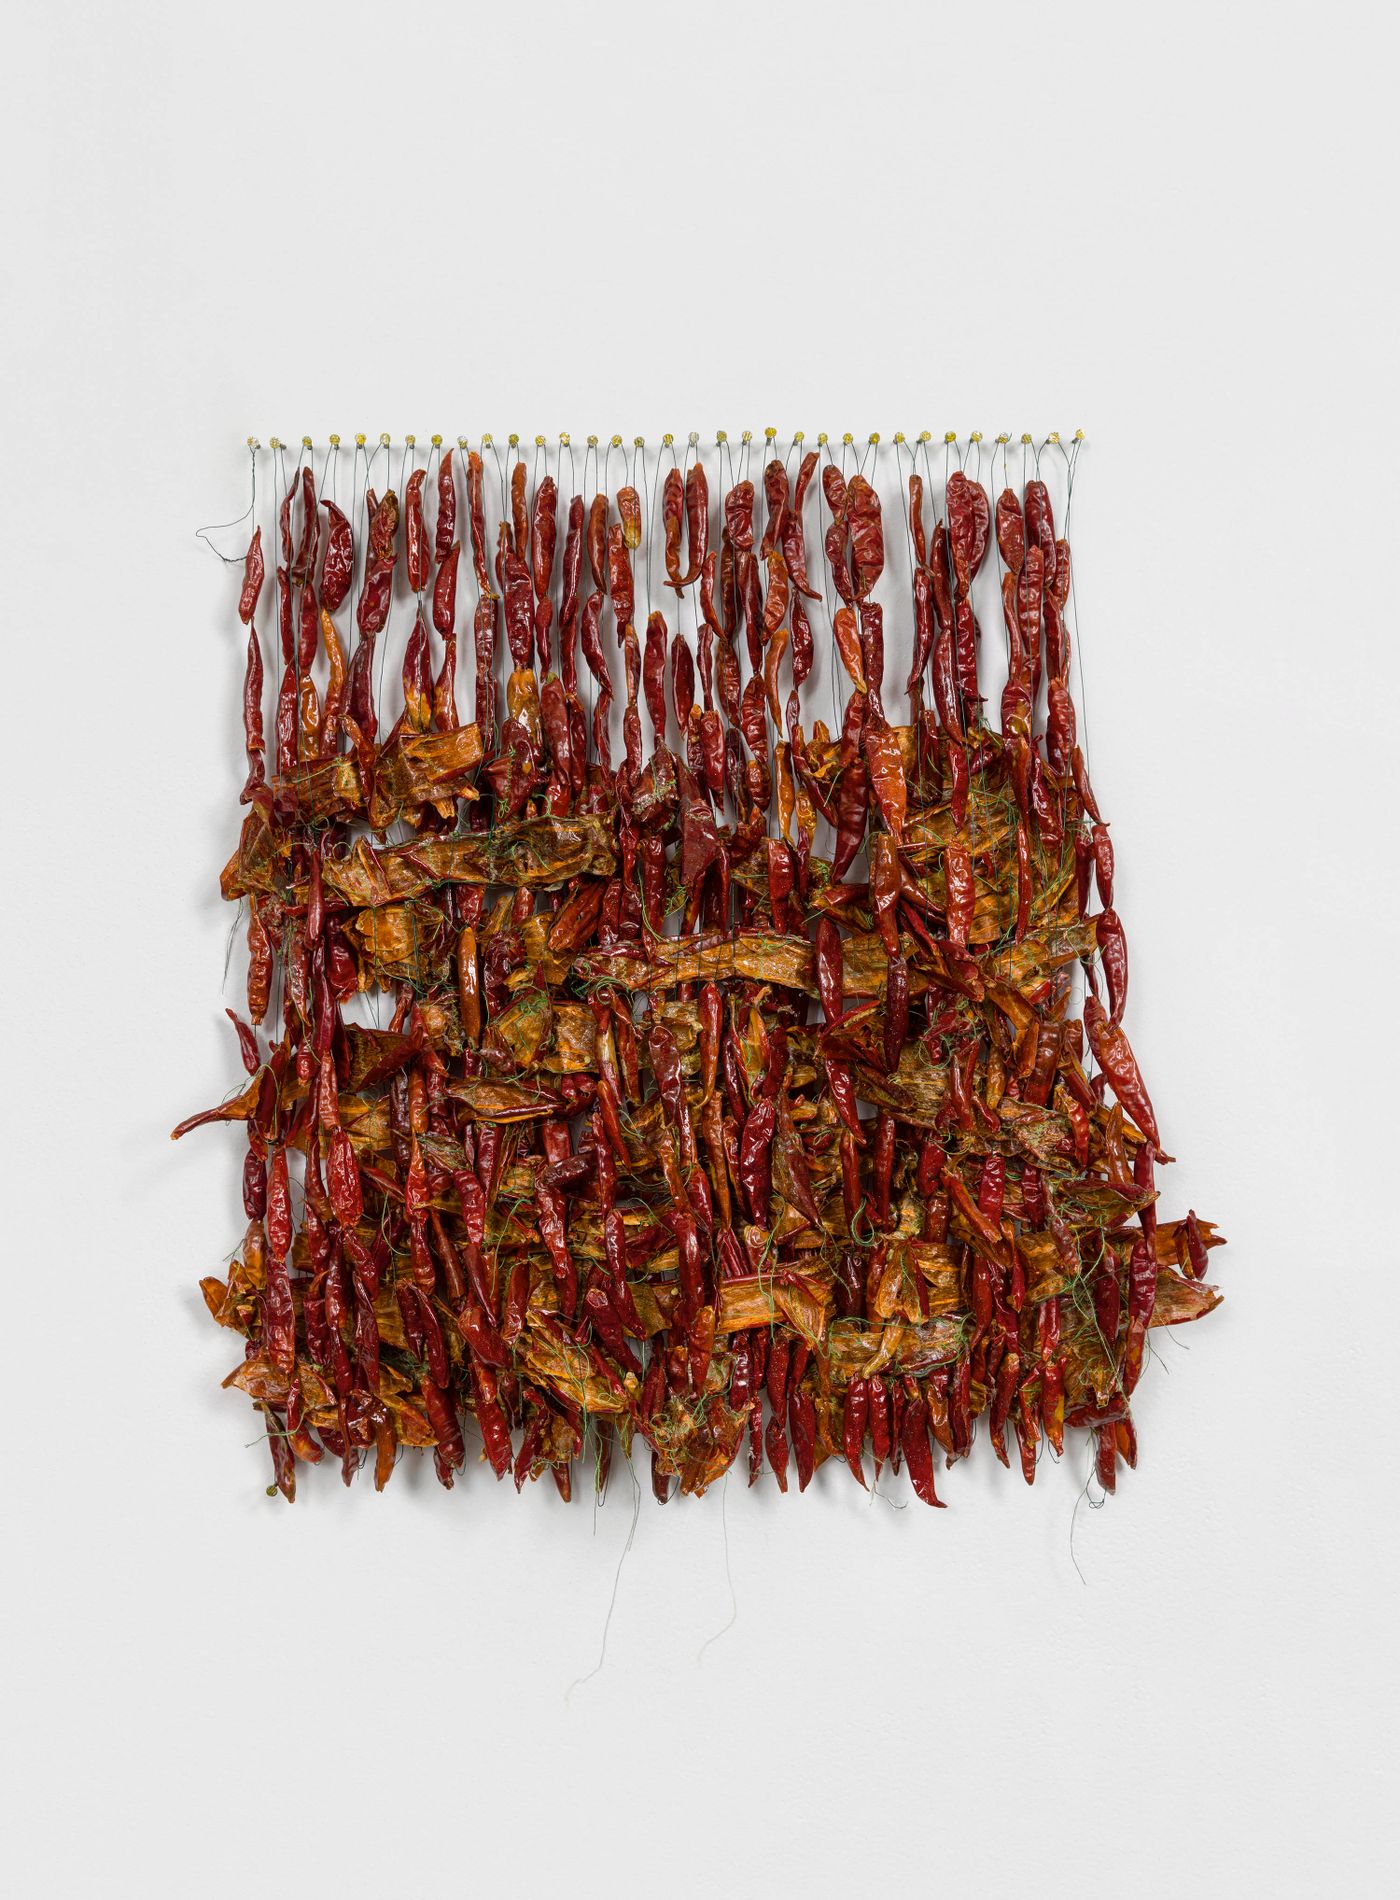 aguas, 2021. Thread, glitter, dried chili peppers, floral wire and nails on wall; 17 x 20 x 2 in. Photo: Etienne Frossard.